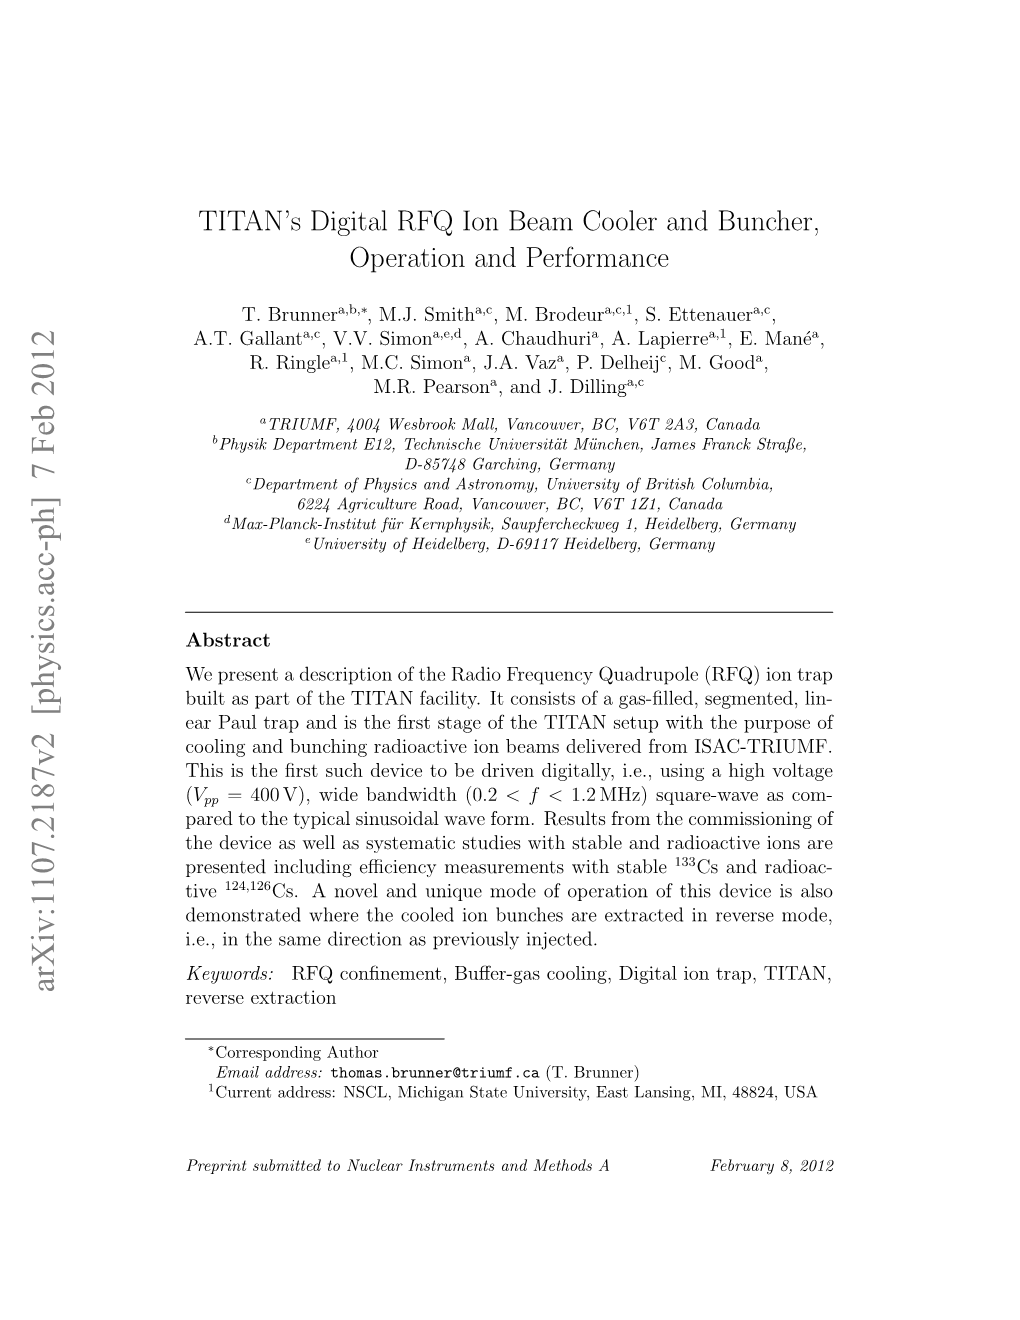 TITAN's Digital RFQ Ion Beam Cooler and Buncher, Operation And